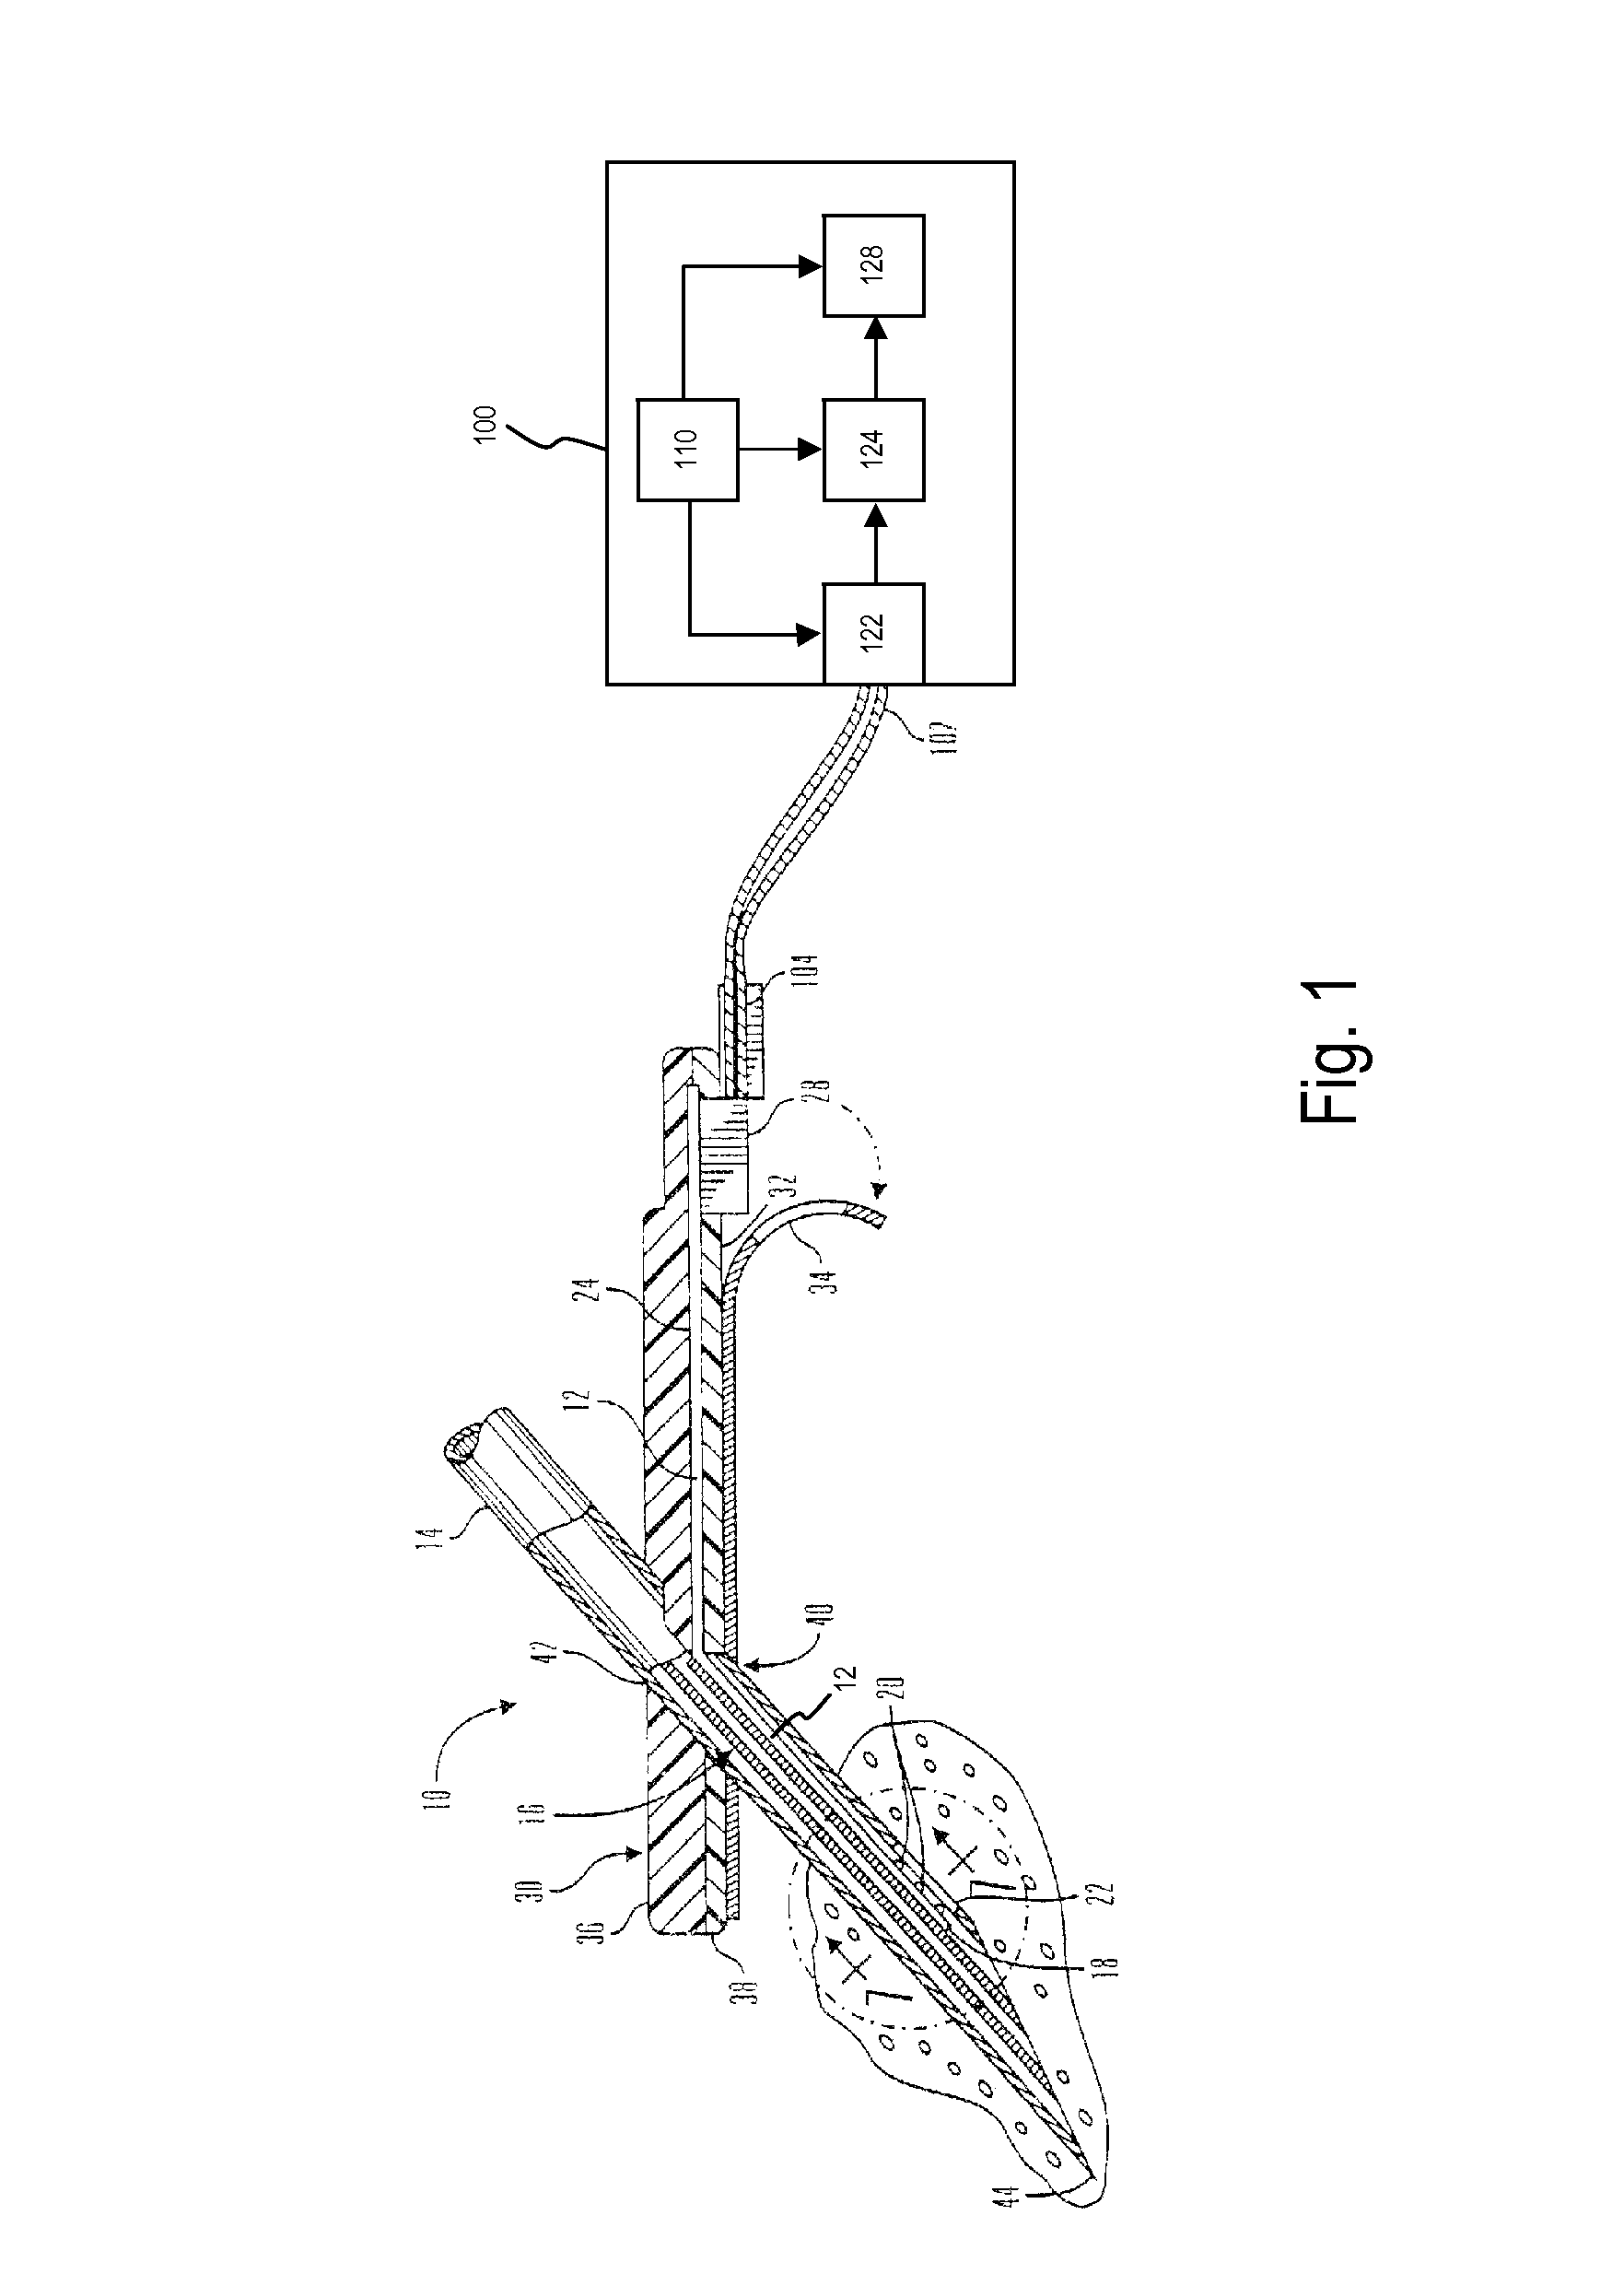 Method and system for remedying sensor malfunctions detected by electrochemical impedance spectroscopy